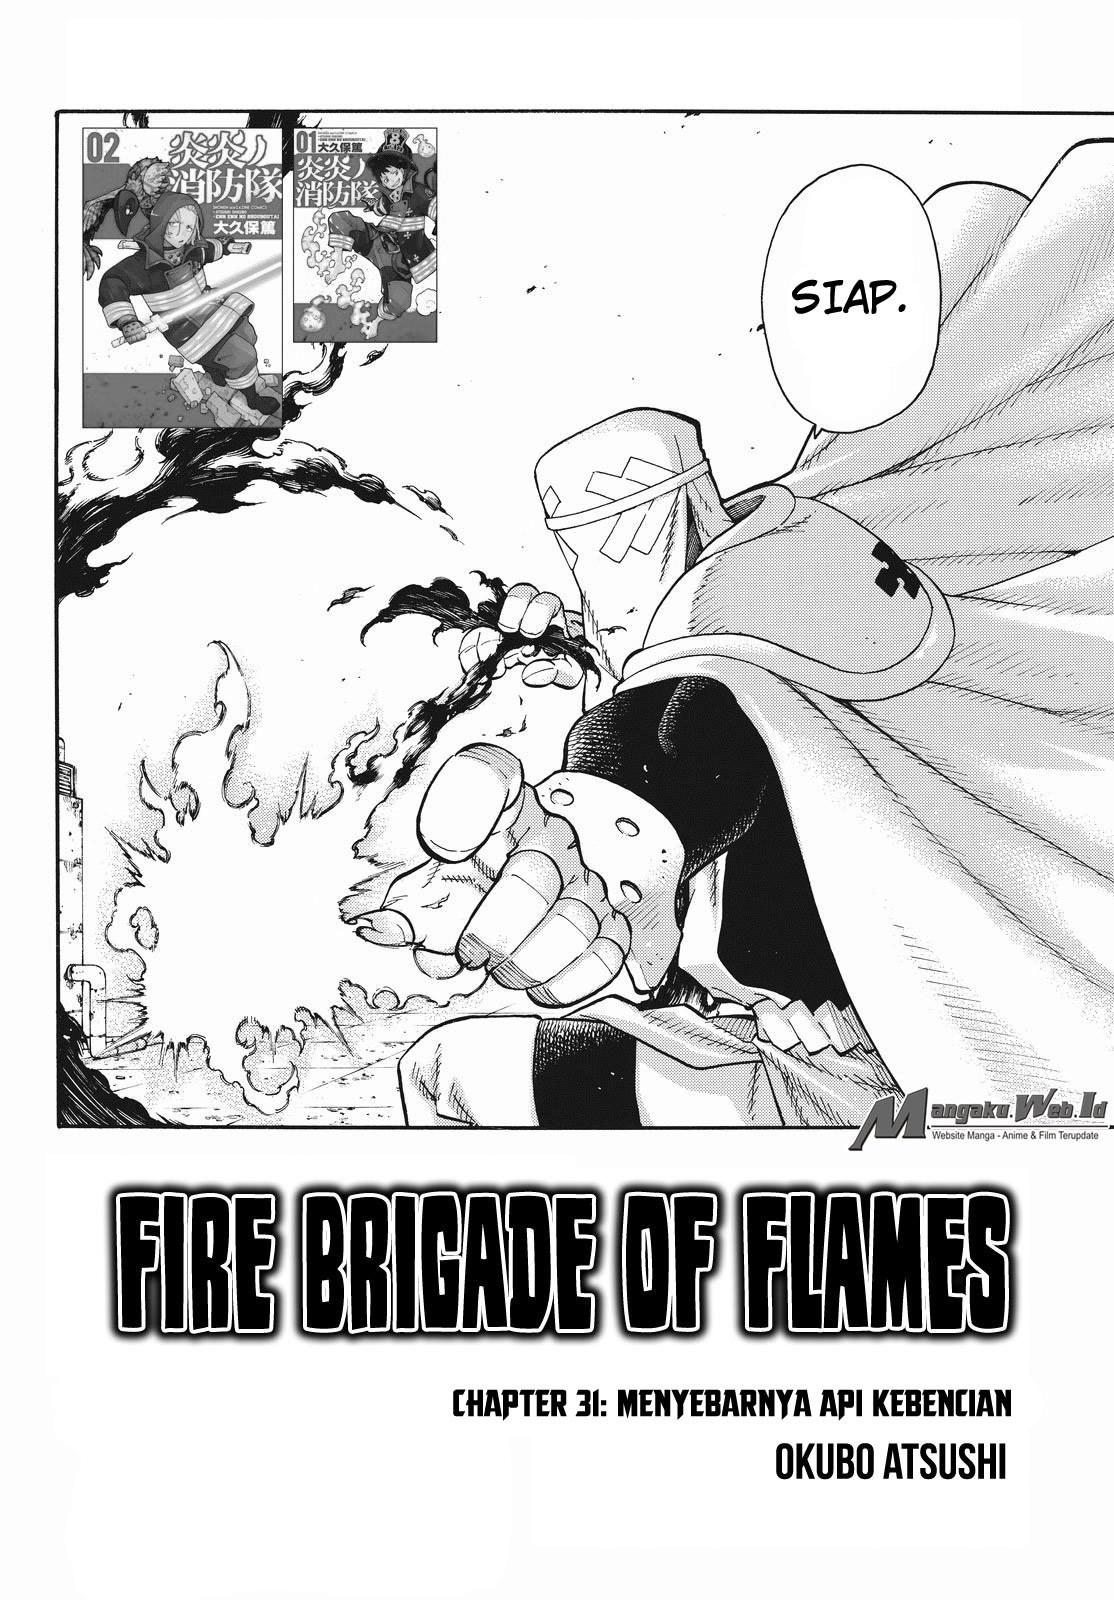 Fire Brigade of Flames Chapter 31